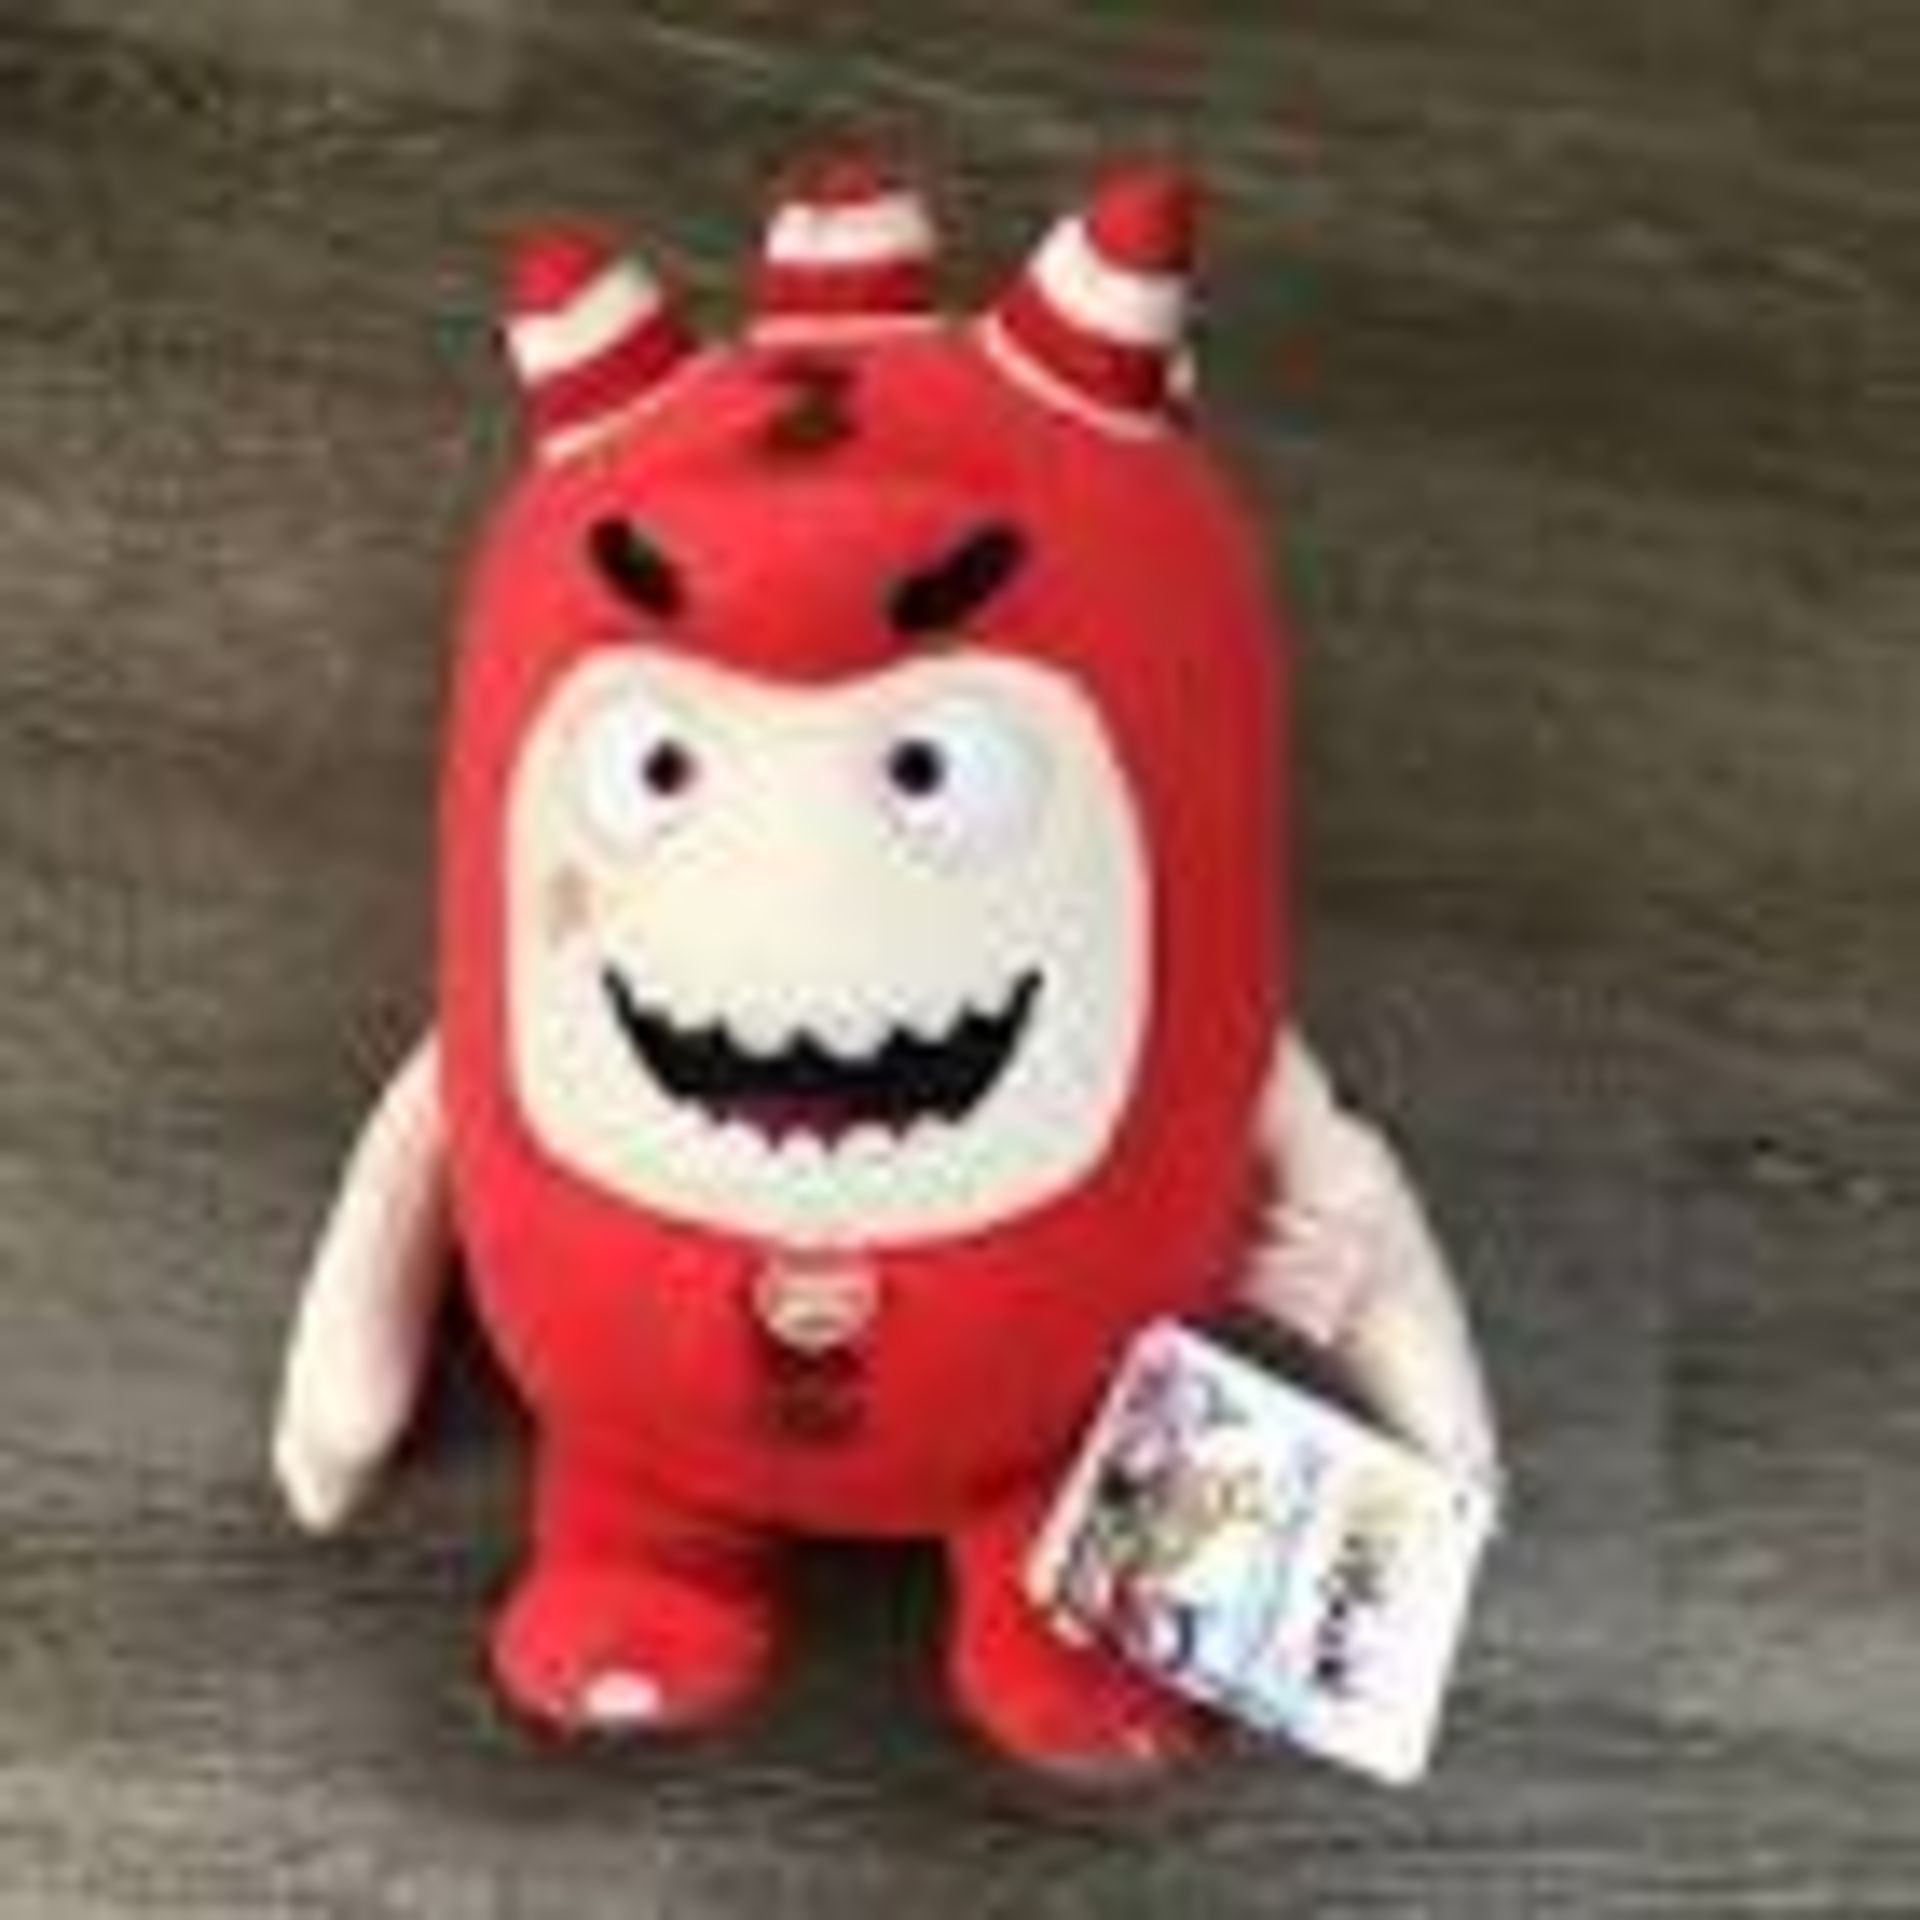 100 x OddBods Plush Toys | Total RRP £1,500 - Image 2 of 2